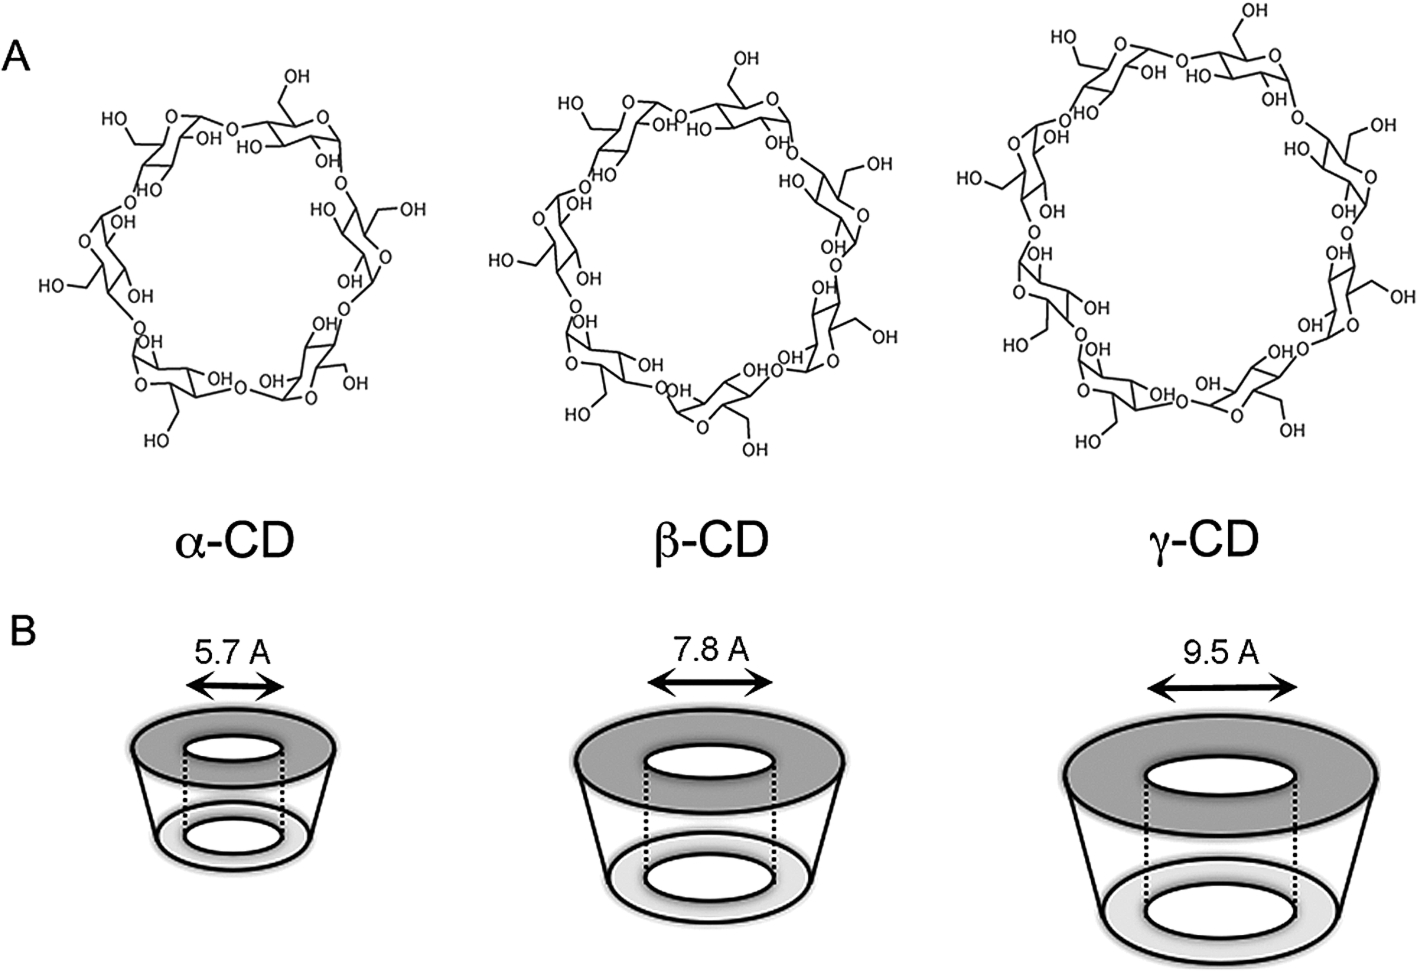 (A) Chemical structures of the three different types of cyclodextrin, alpha (α) – containing 6 glucopyranose units, beta (β) – containing 7 glucopyranose units and gamma (γ) – containing 8 glucopyranose units. (B) Representative images of the rings formed by the three different cycodextrins and the respective size of their pockets.